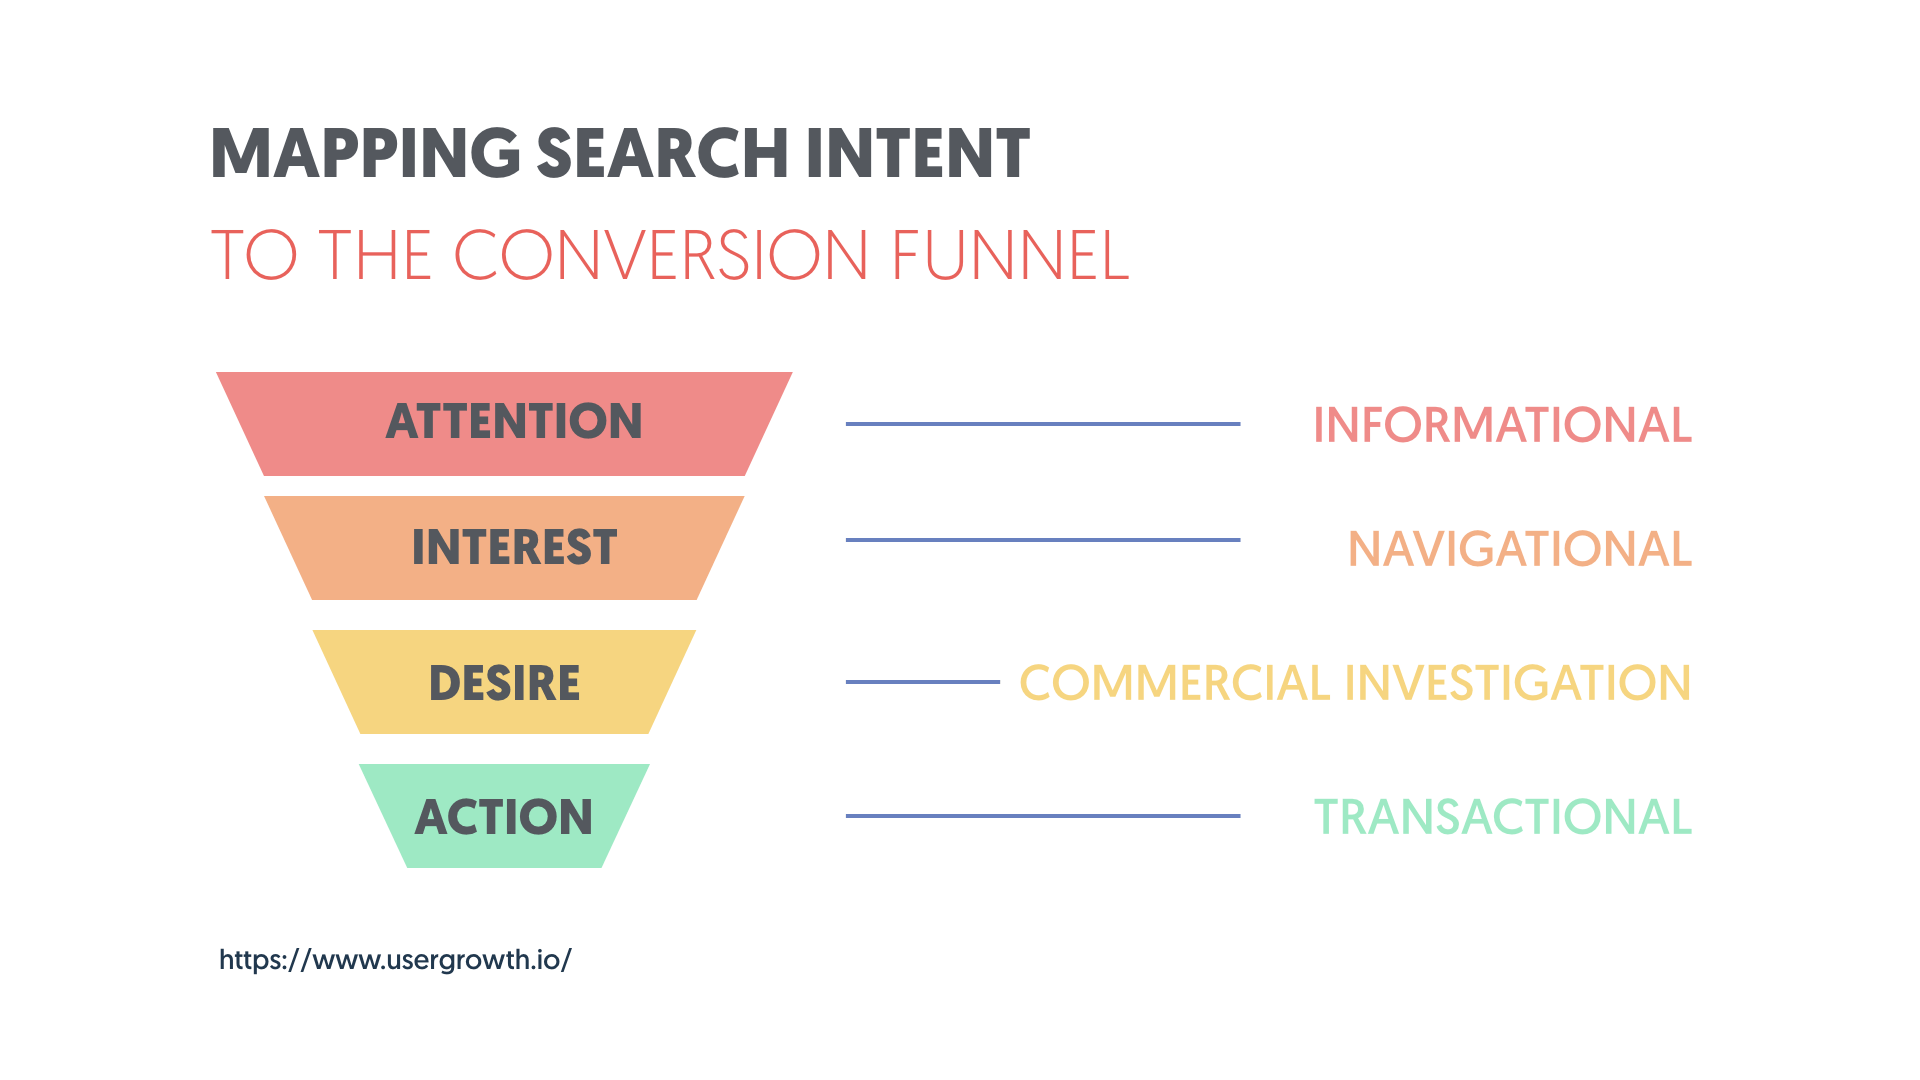 Mapping Search Intent to the Conversion Funnel